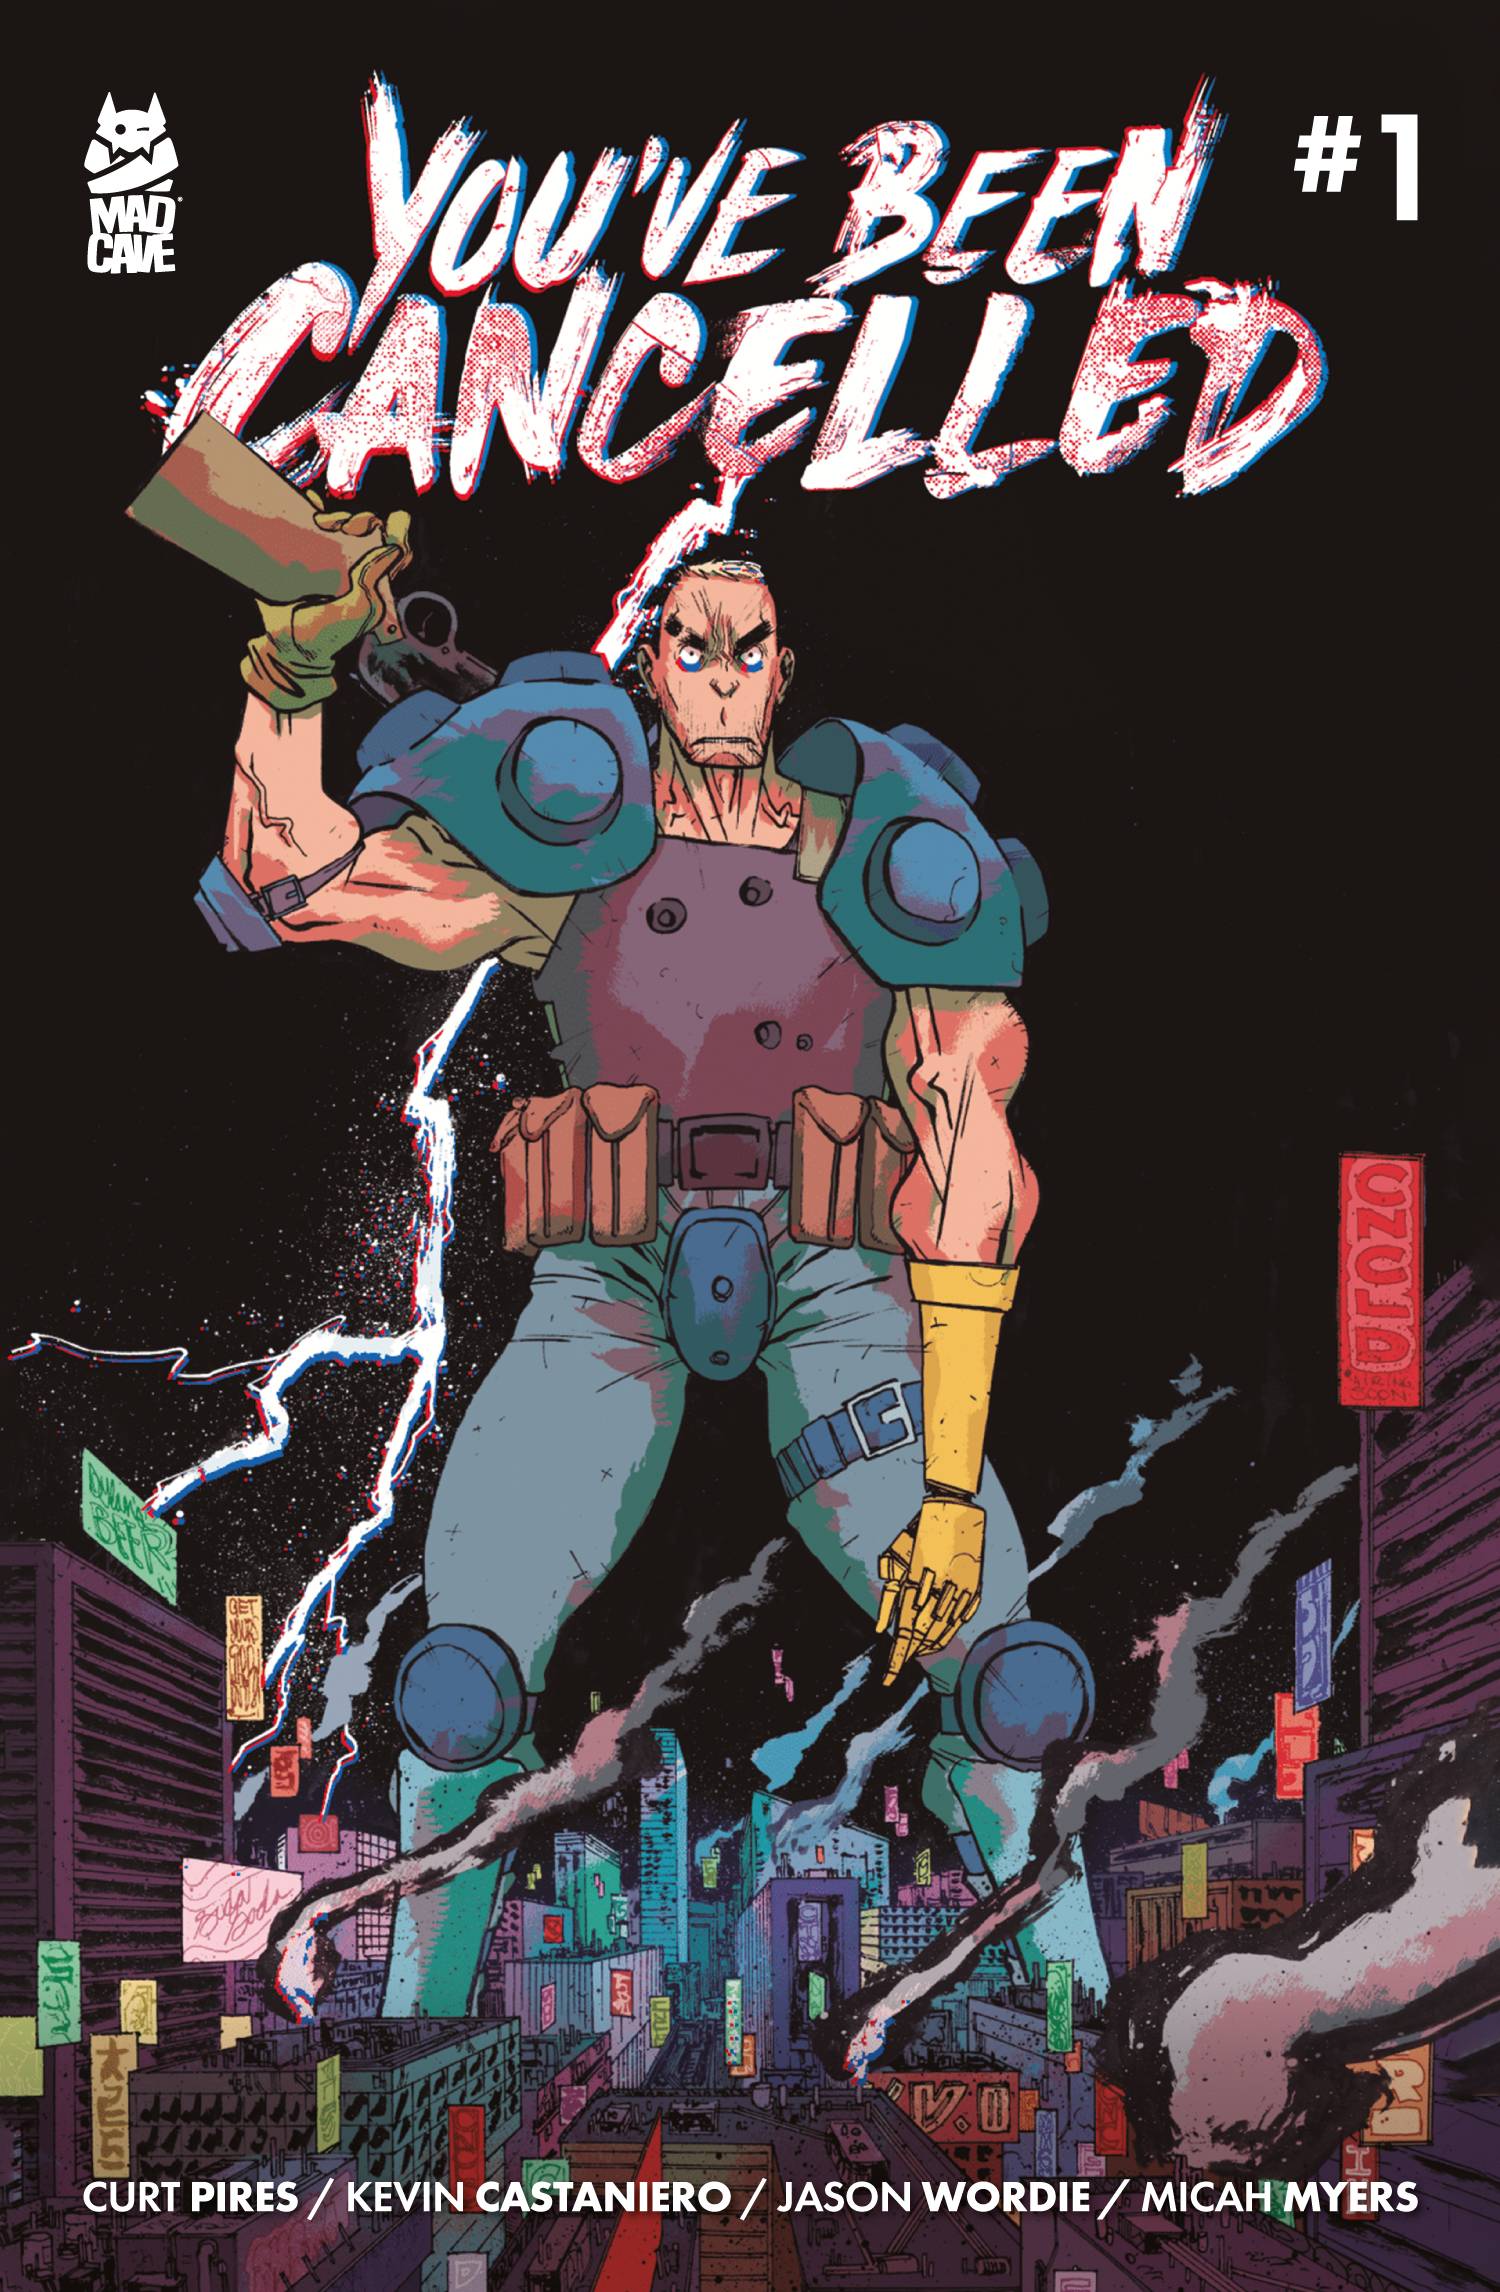 YOUVE BEEN CANCELLED #1 (OF 4) CVR A CASTANIERO (MR)